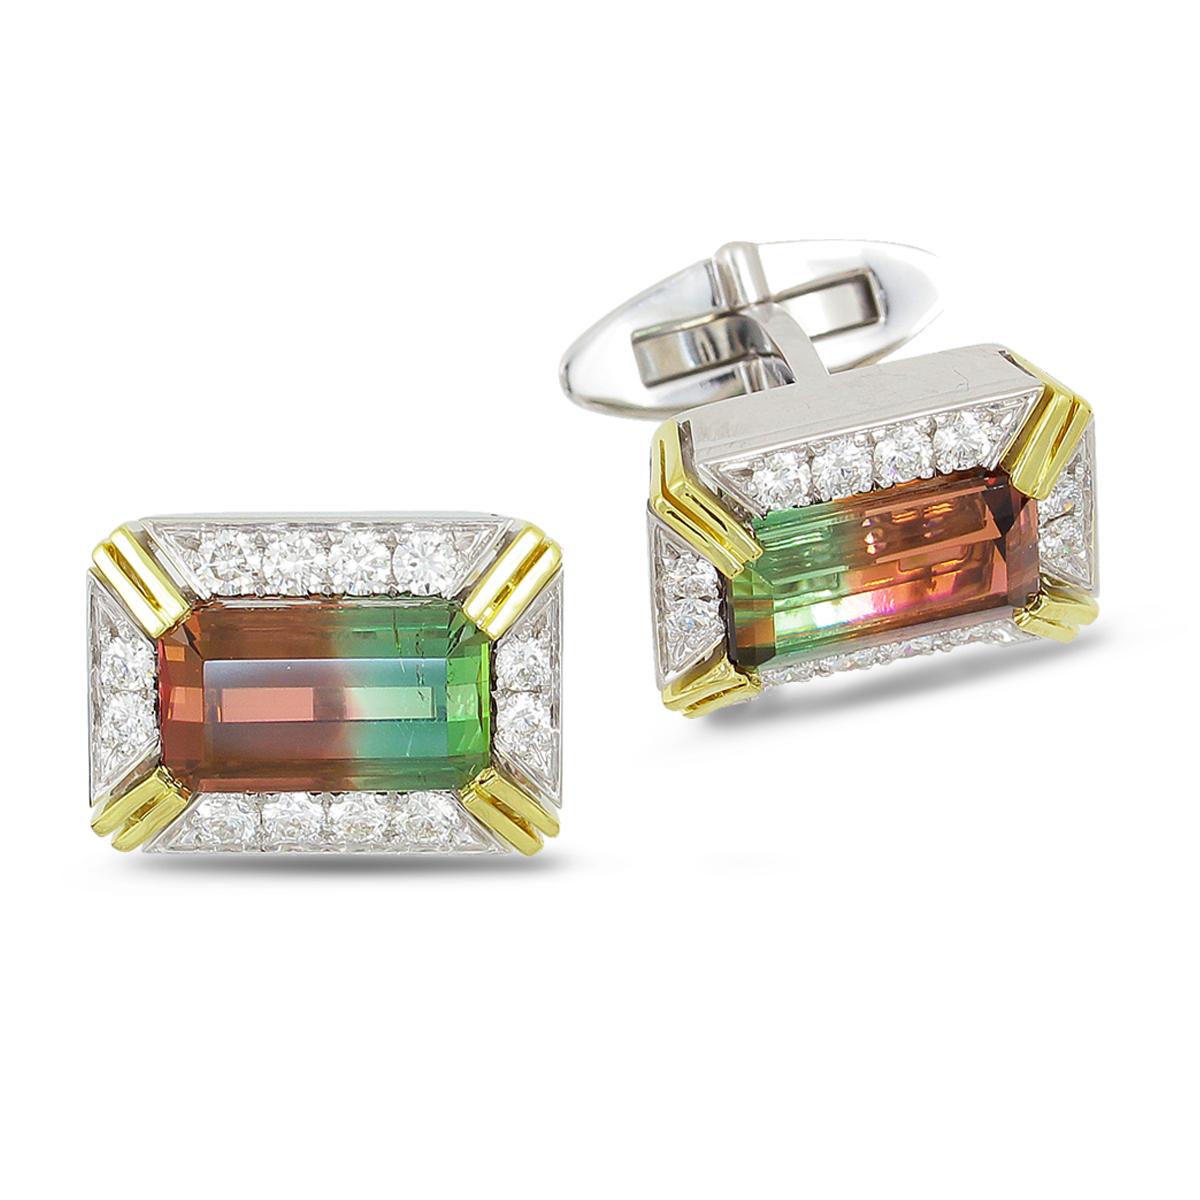 Frederic Sage 9.29 Carat Watermelon Tourmaline White and yellow gold Cufflinks For Sale 1